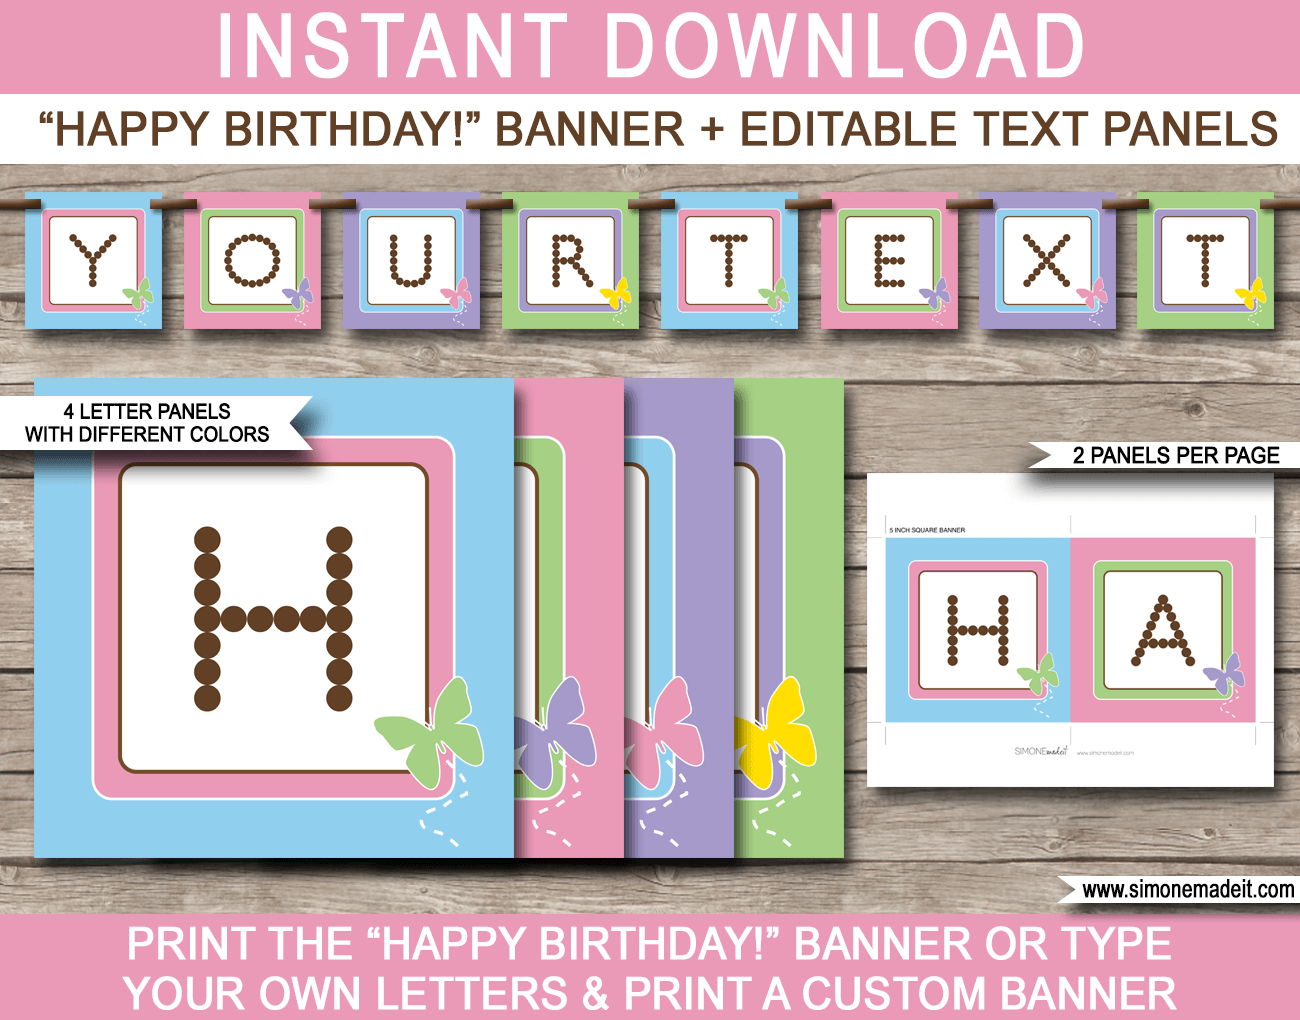 Butterfly Party Banner Template - Butterfly Bunting - Happy Birthday Banner - Birthday Party - Editable and Printable DIY Template - INSTANT DOWNLOAD $4.50 via simonemadeit.com